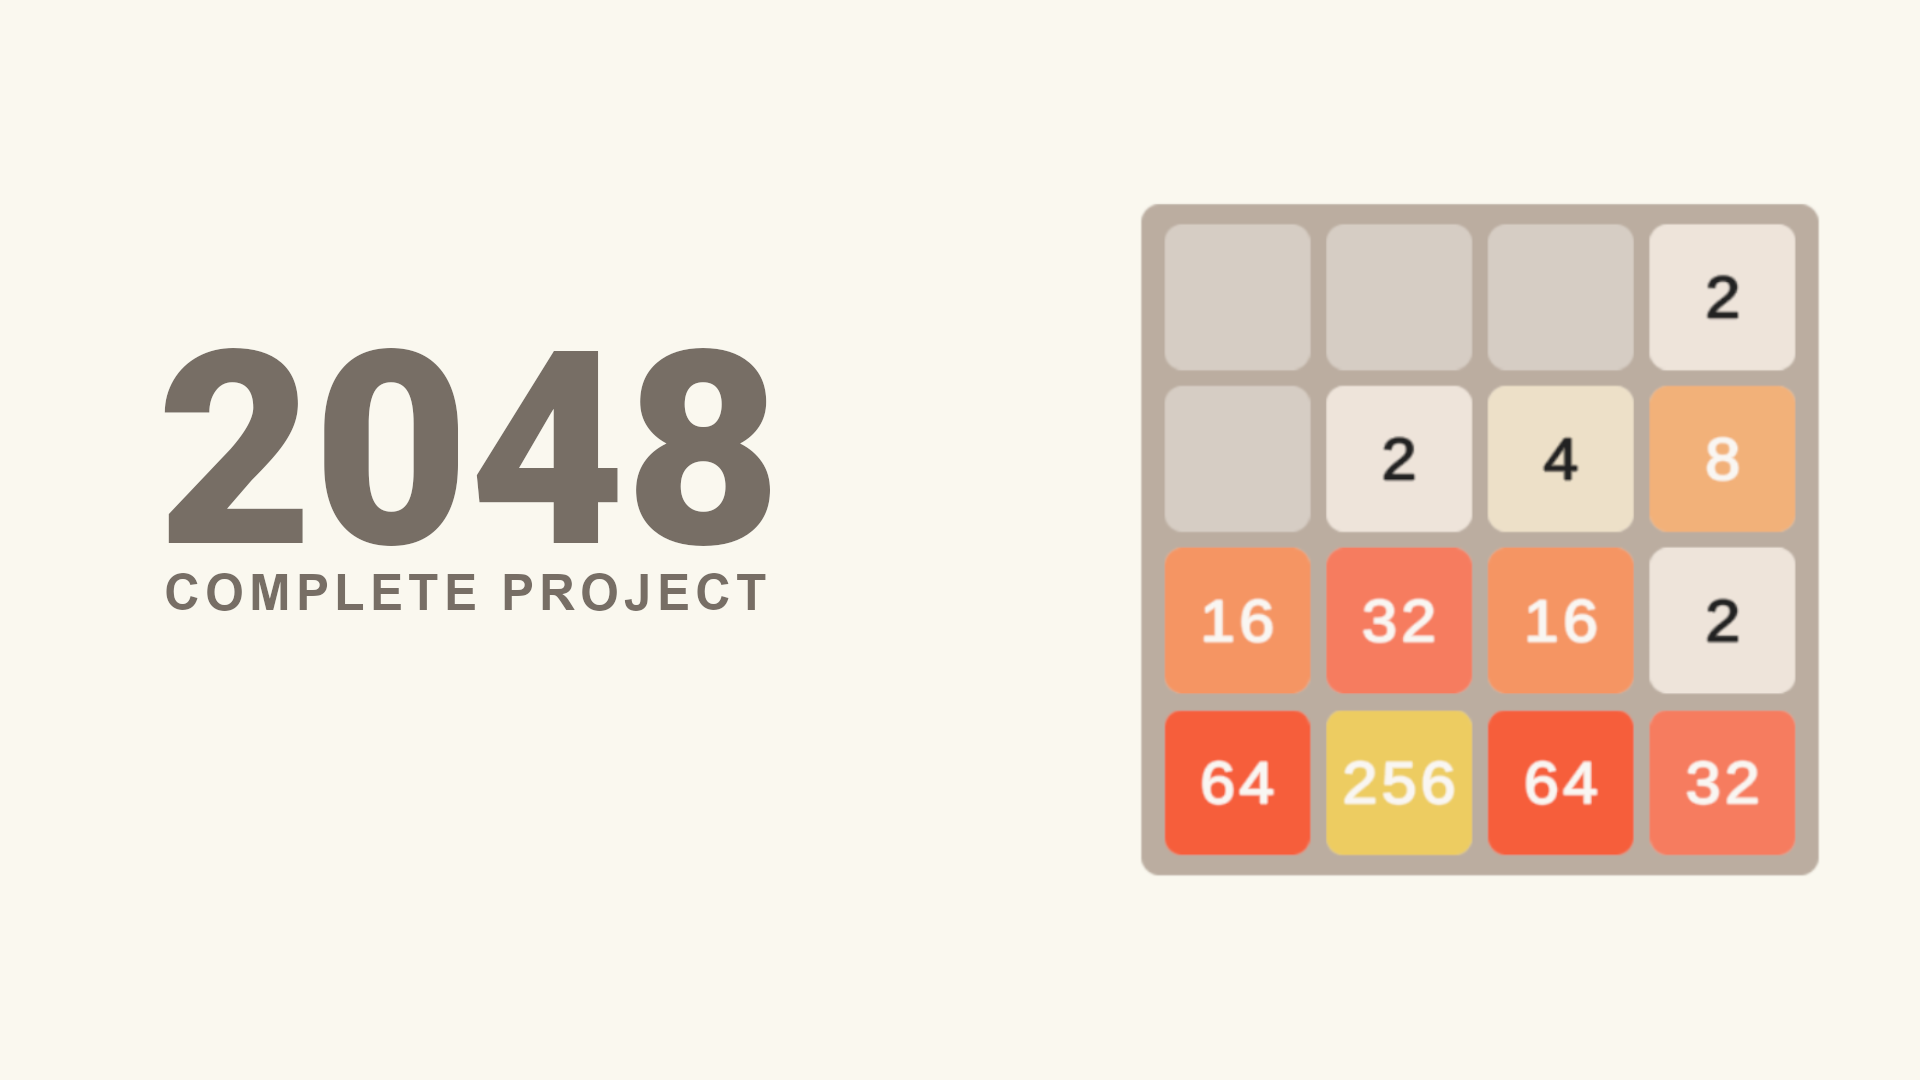 2048: Complete Project